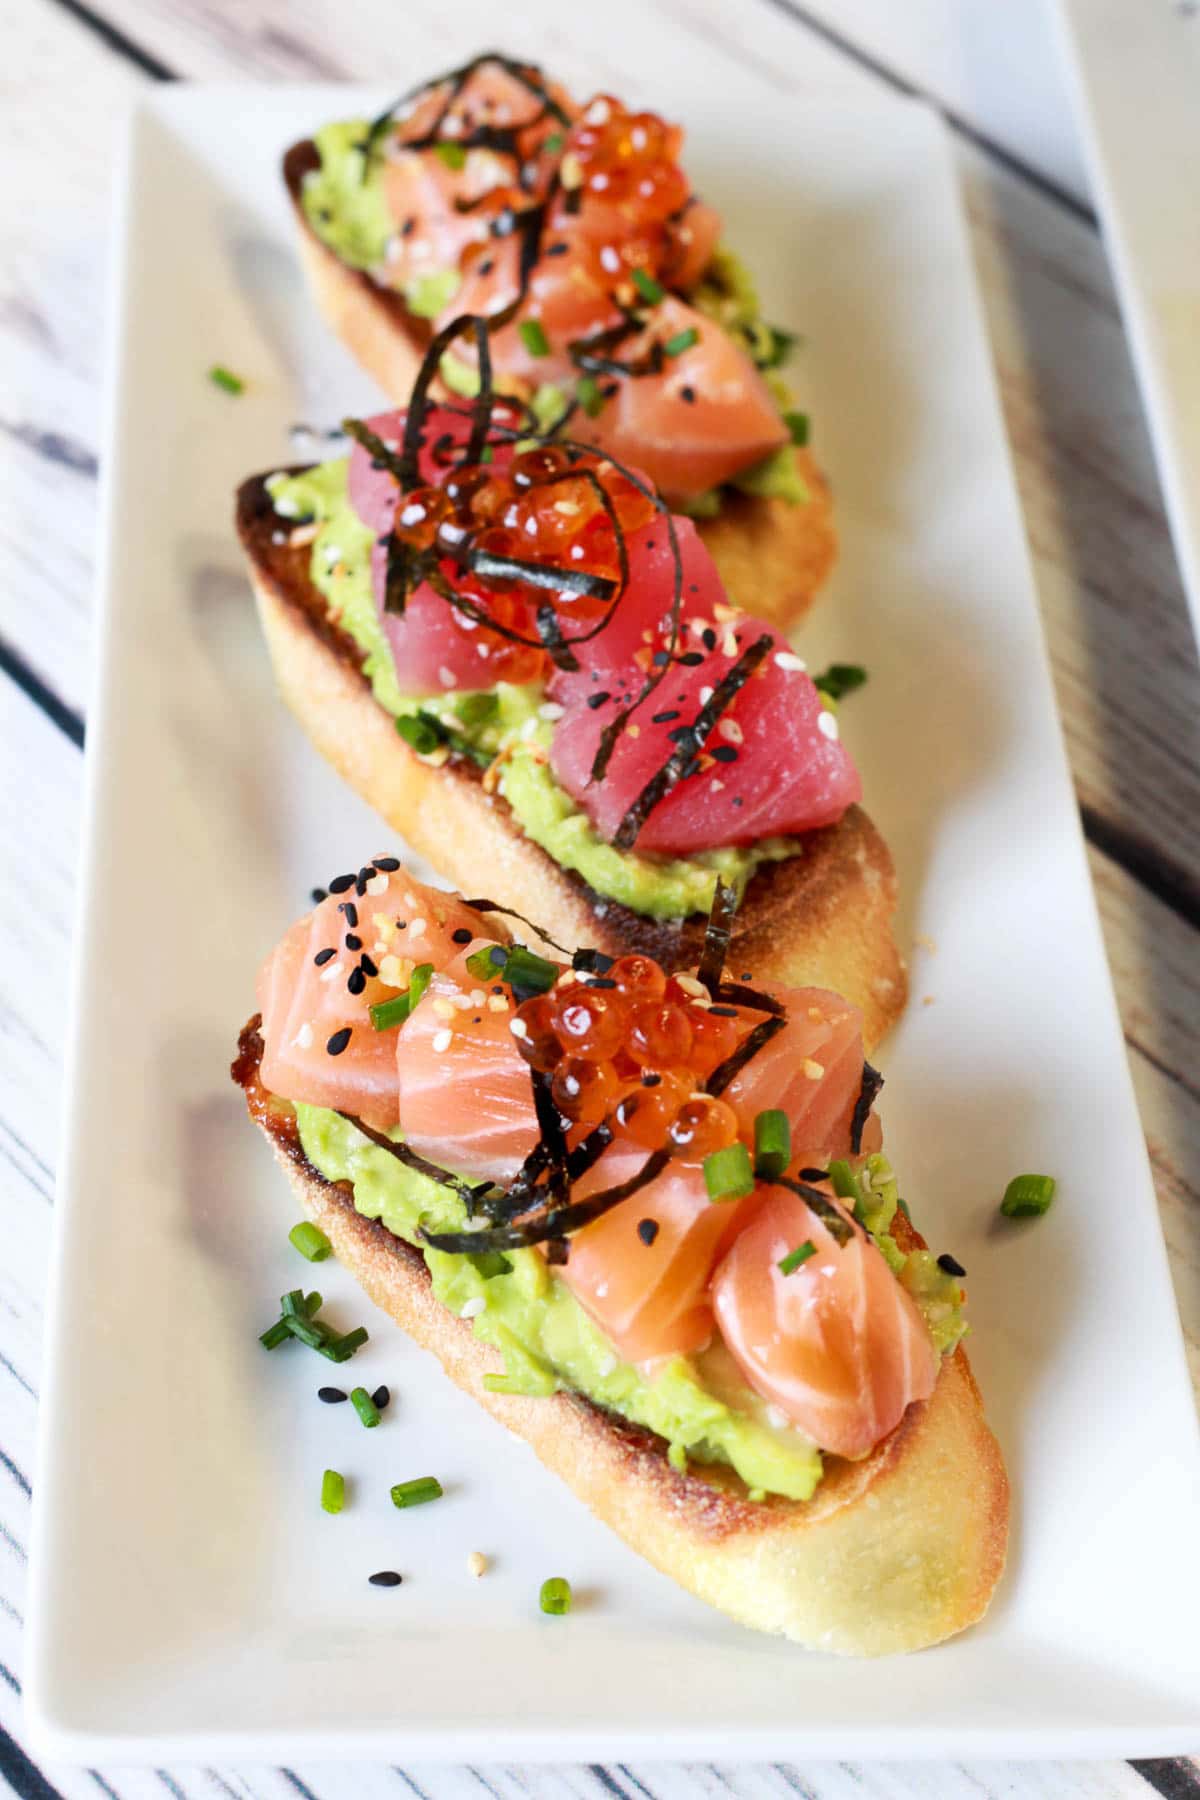 sushi grade tuna and salmon on avocado toast placed on a white platter